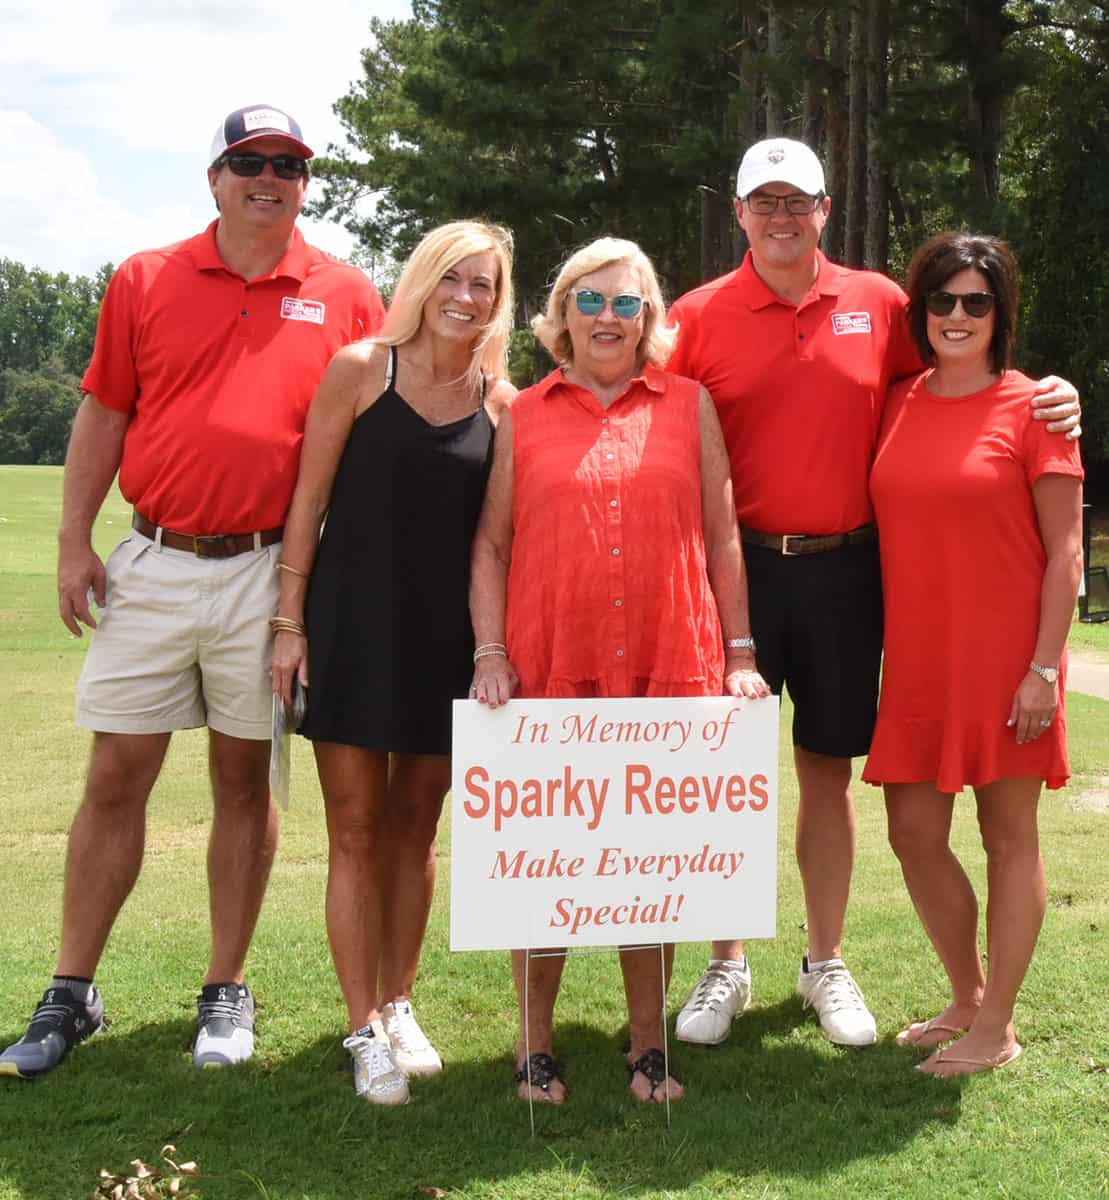 Sparky Strong – Shown above are members of the Reeves family showing their support of the SGTC Sparky Reeves Golf Tournament Classic. Shown (l to r) are: Ryan and Mandy Reeves Young, Allene Reeves, and Kevin and Jenny Reeves with the In Memory of Sparky Reeves hole sponsor sign placed on the first tee.